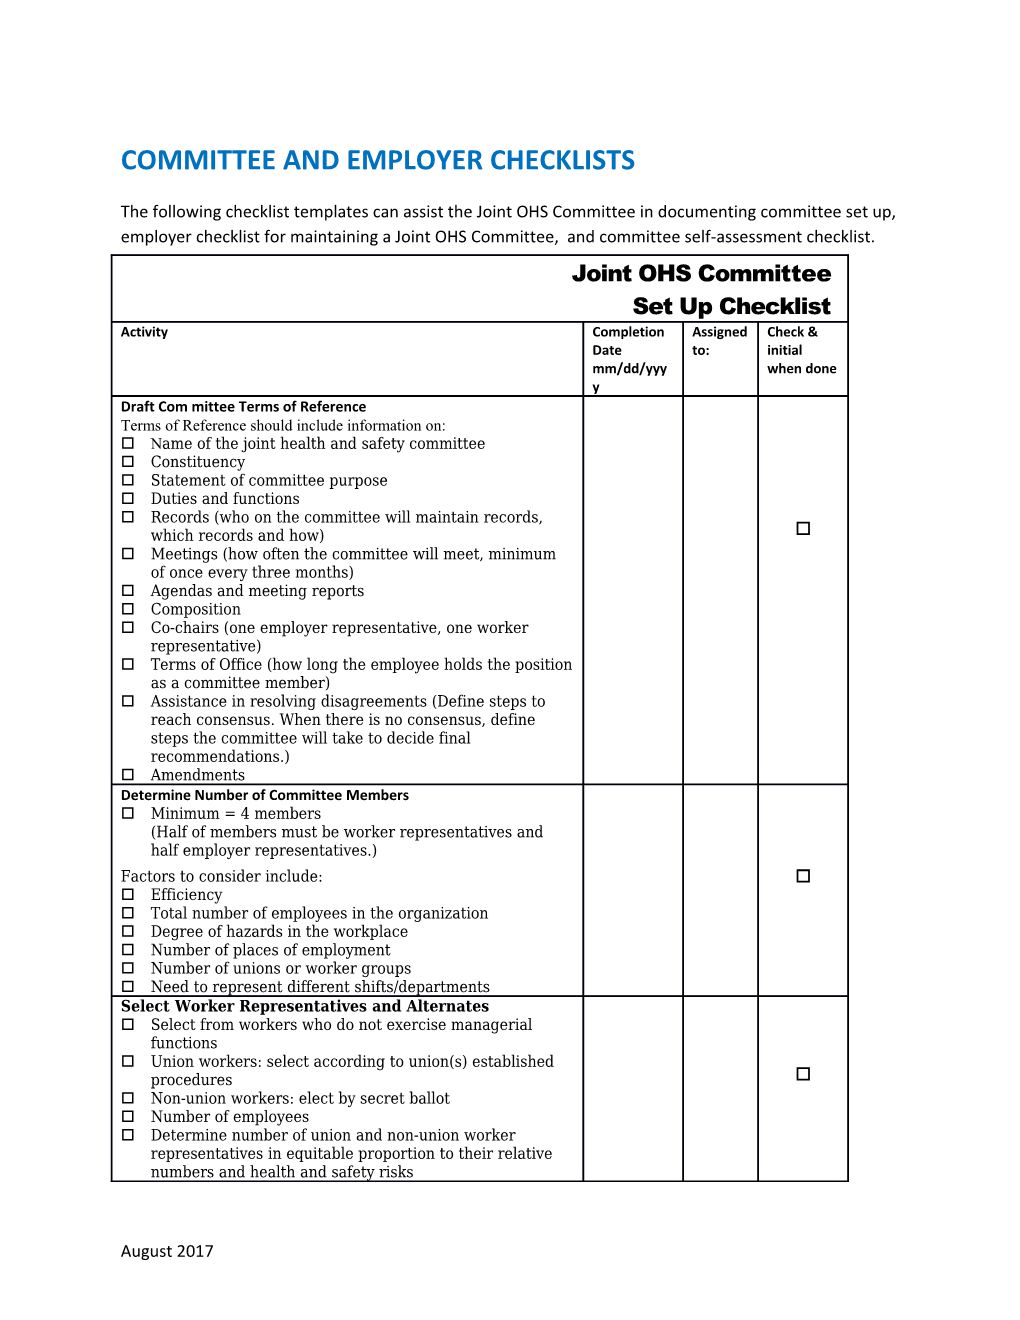 Committee and Employer Checklists